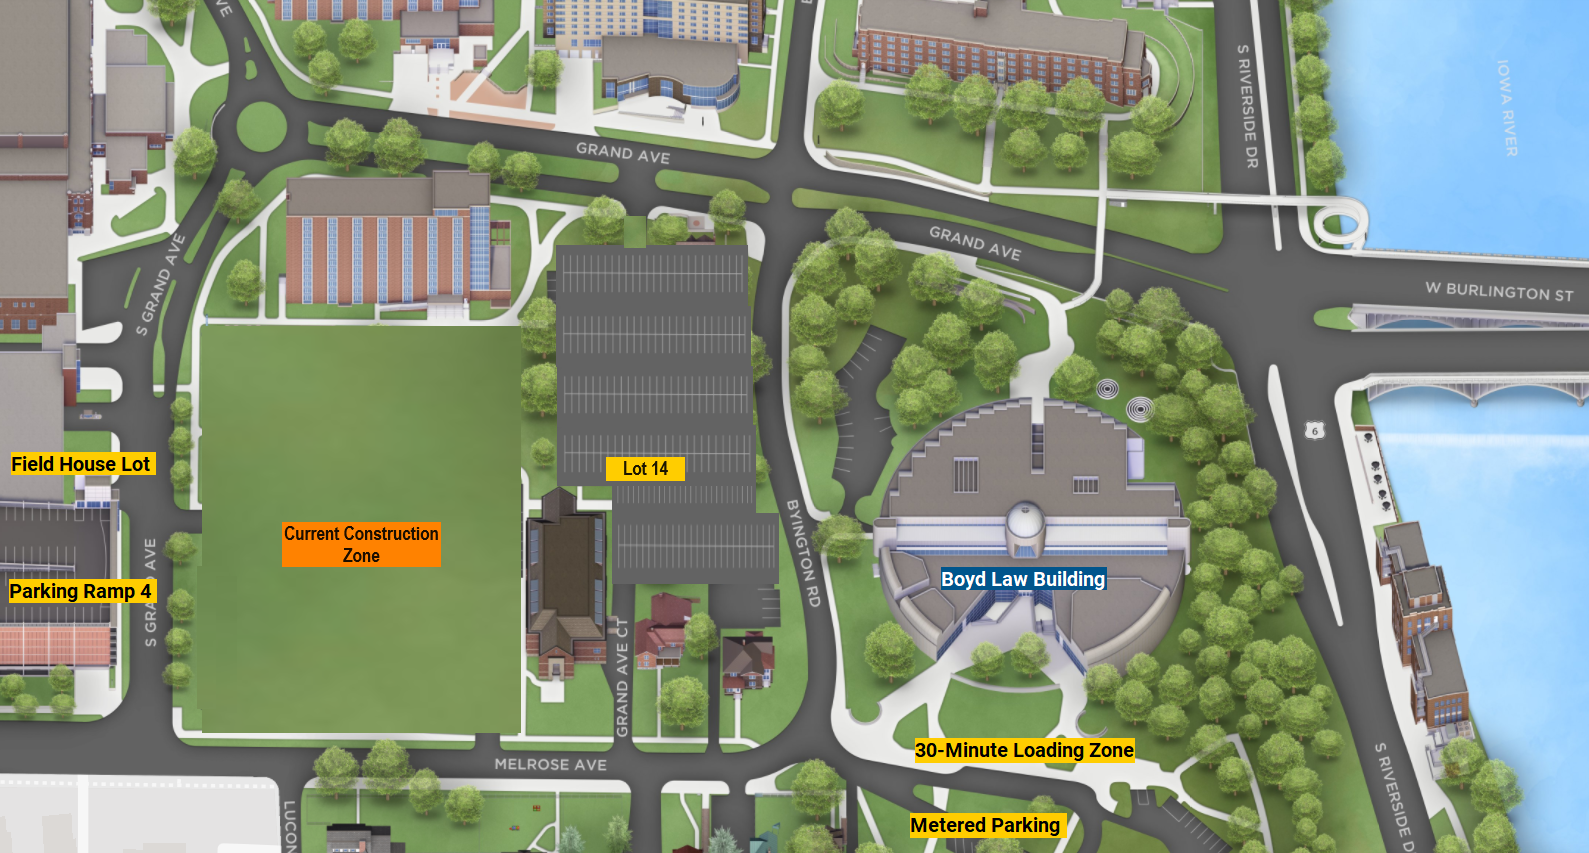 Map of area surrounding Boyd Law Building with several parking options labeled, including a 30-minute loading zone and metered parking in front of Boyd Law Building; Lot 14; Parking Ramp 4; and the Field House Lot.